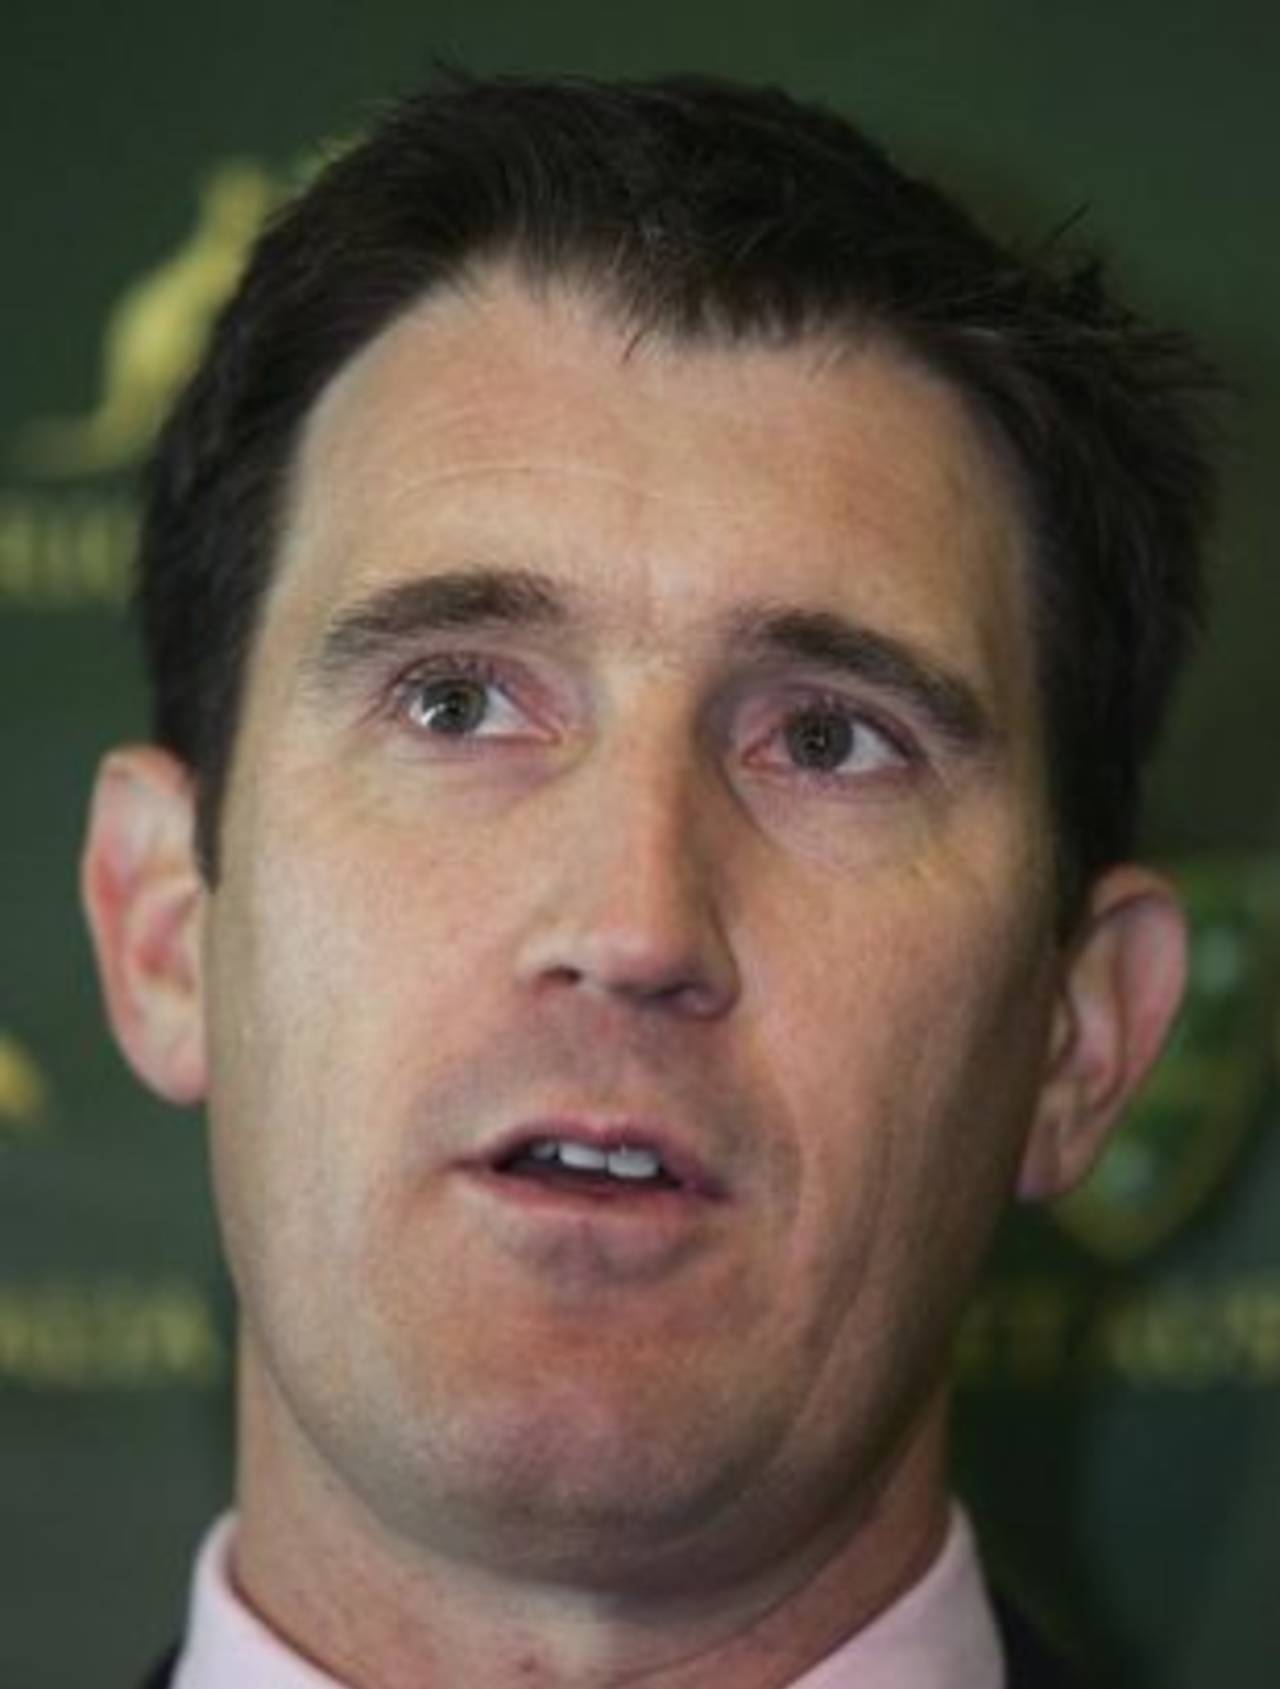 James Sutherland tells the media that "idiot" fans will not be tolerated, Sydney, November 9, 2006